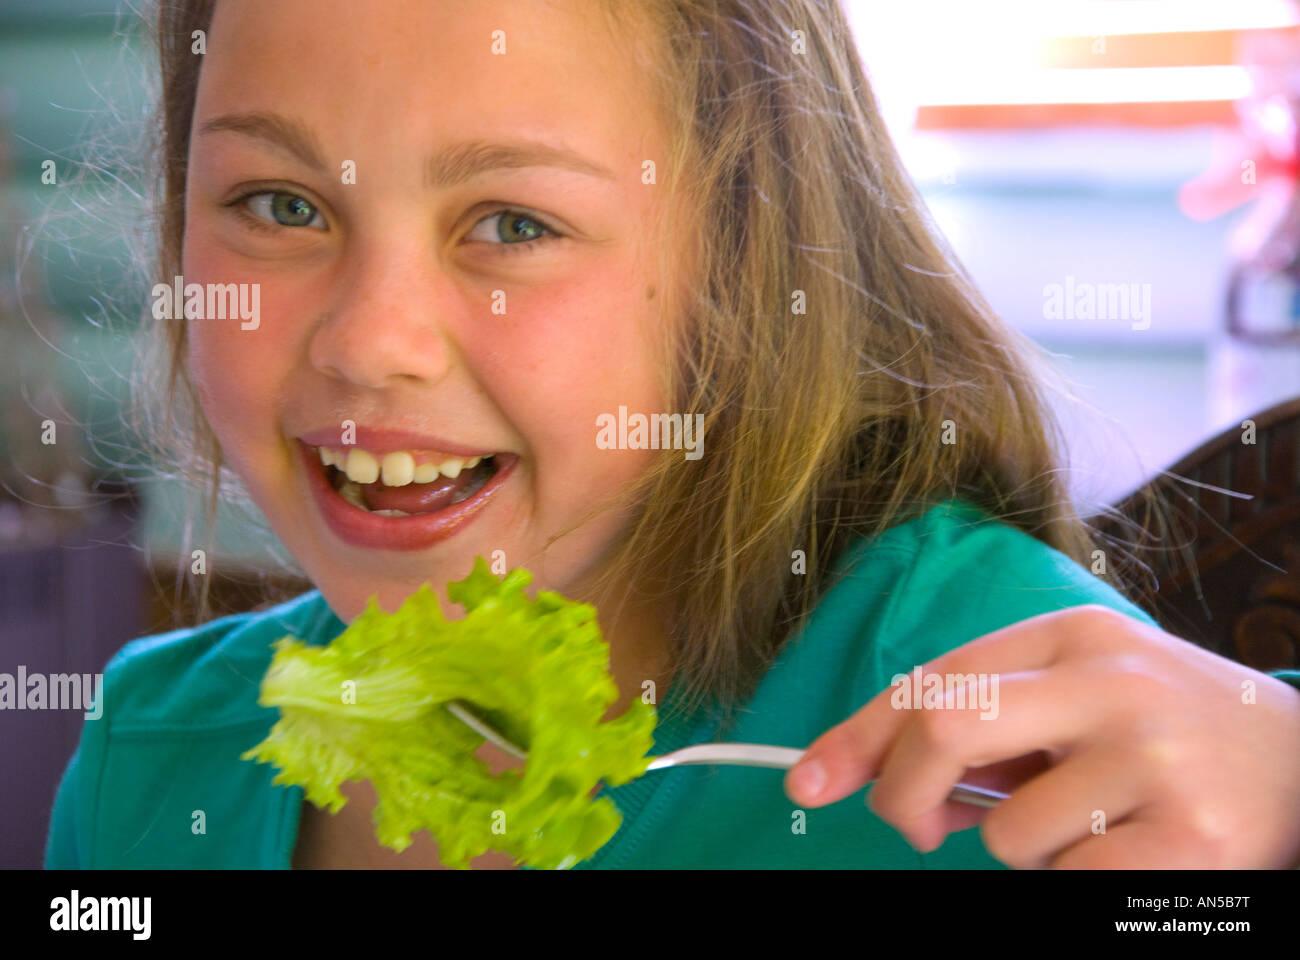 Pretty young girl eating lettuce from a fork Stock Photo